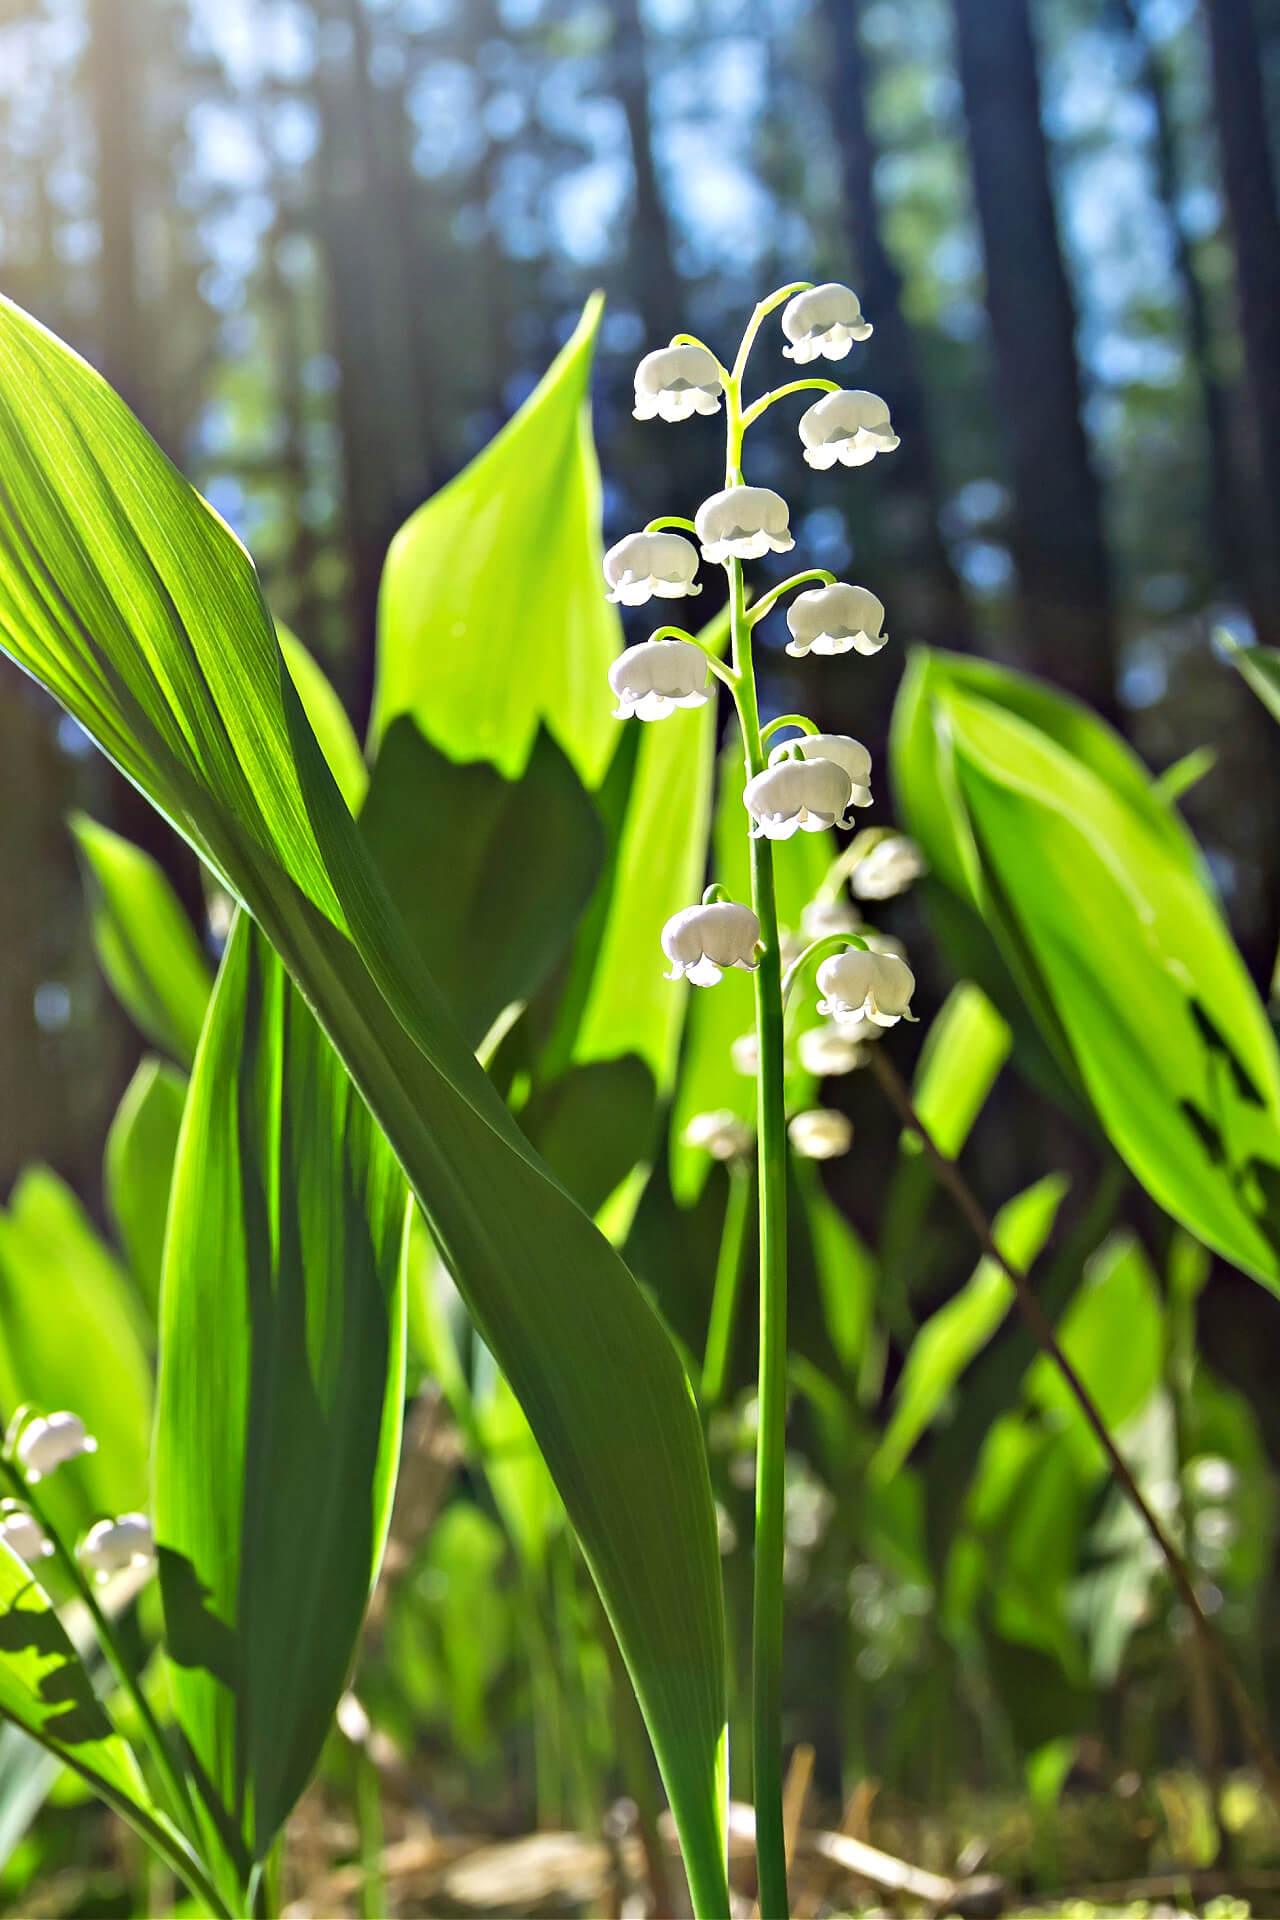 Lily Of The Valley Plant For Sale Online  Buy 1 Get 1 Free – Garden Plants  Nursery